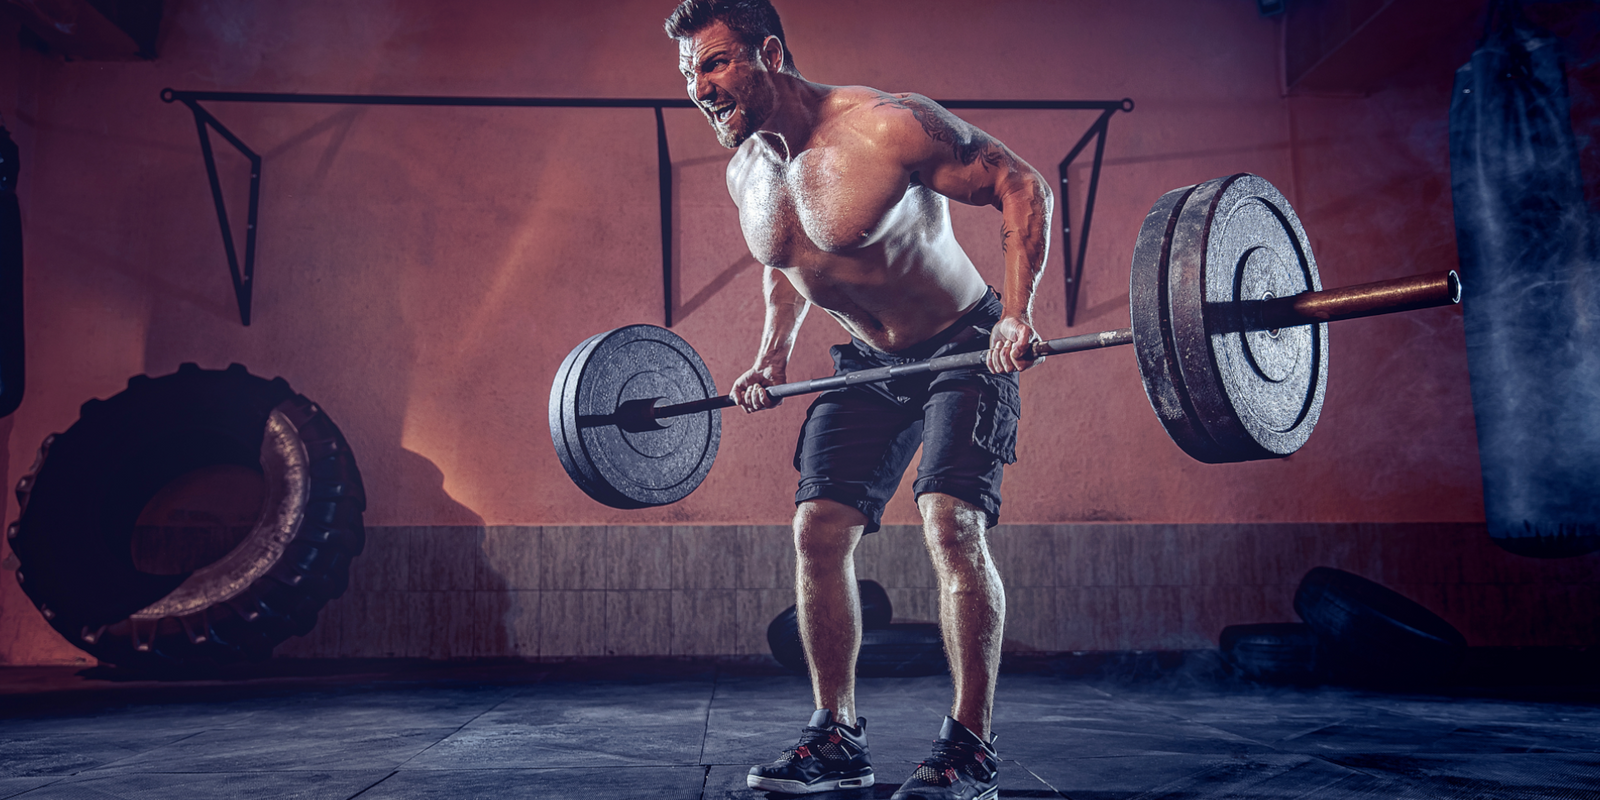 The Beginner's Guide To Proper Weight Lifting Form